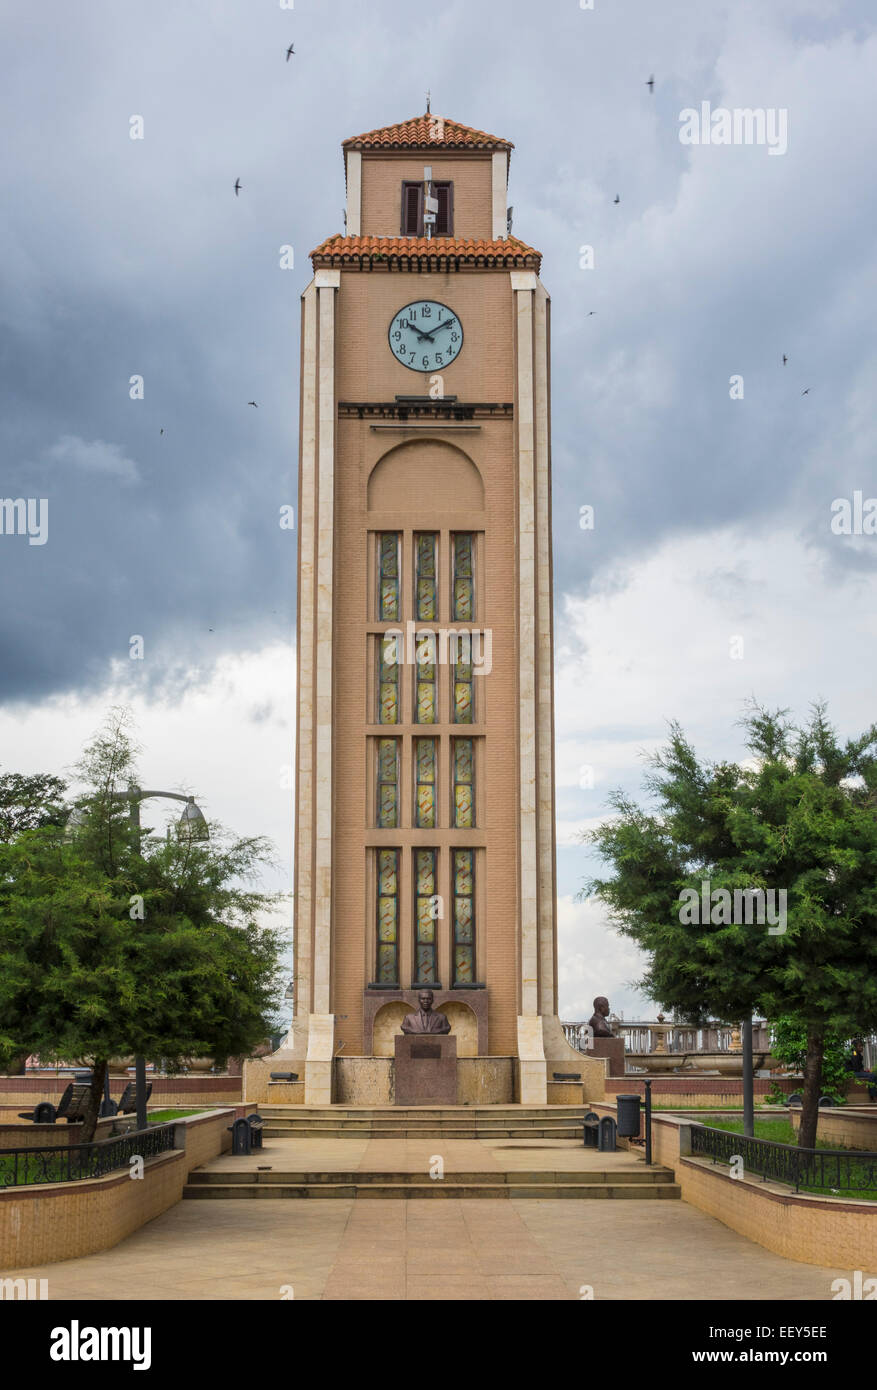 Clock tower and statues of the President and Head of State in his home town of Mongomo, Equatorial Guinea in West Africa Stock Photo